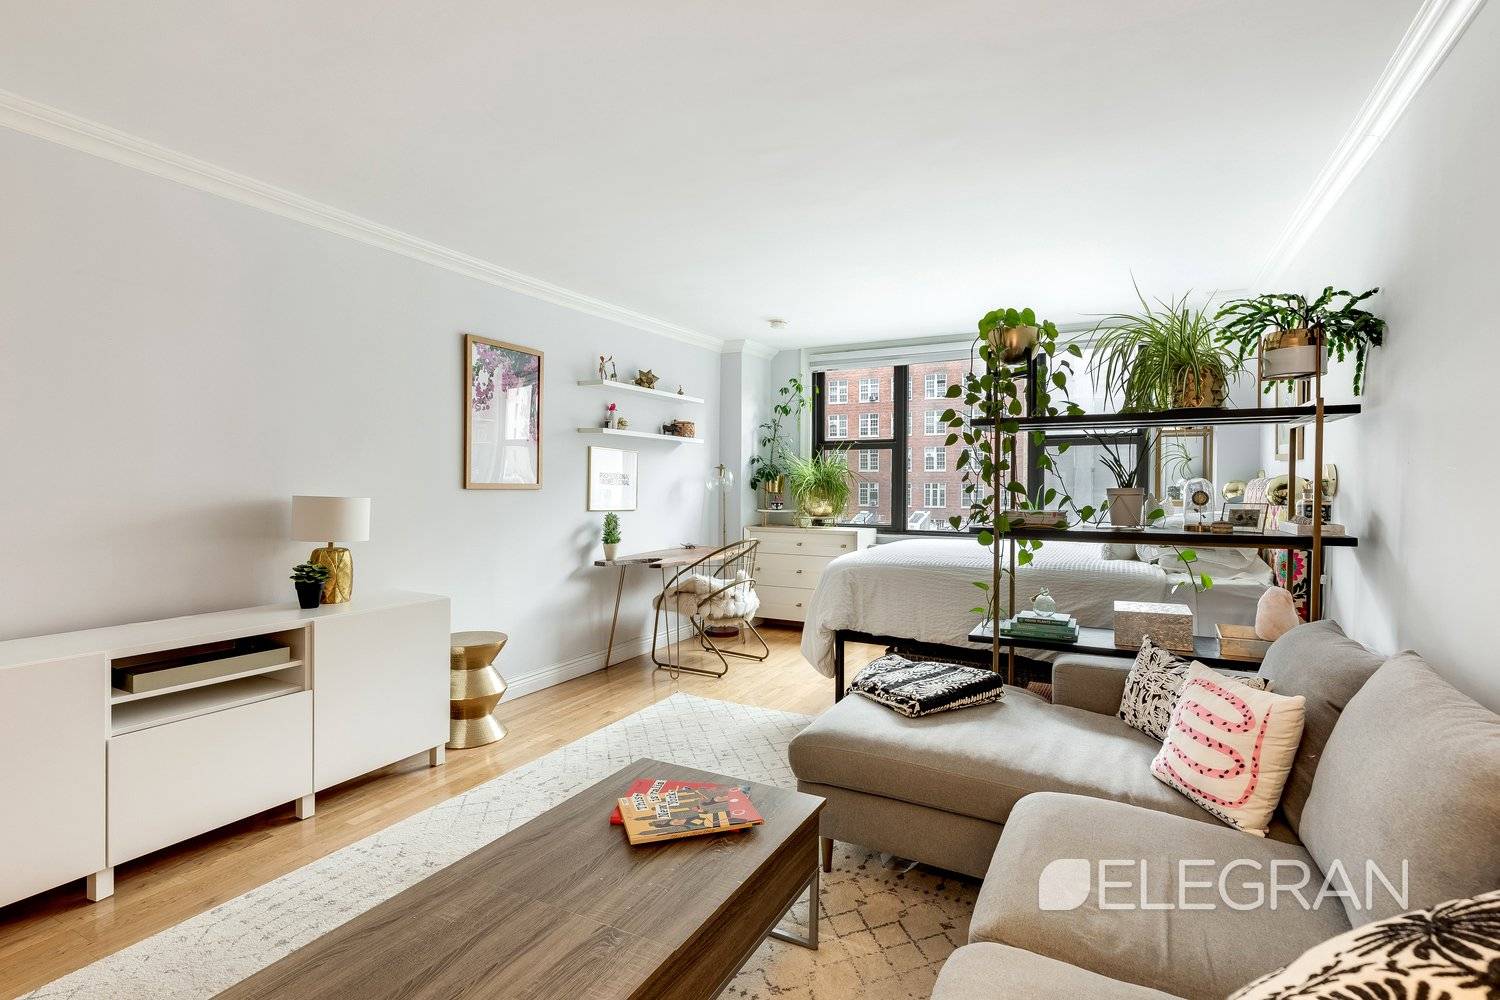 Bursting with natural light, this south facing studio apartment offers a serene and sunny lifestyle that s certain to impress.